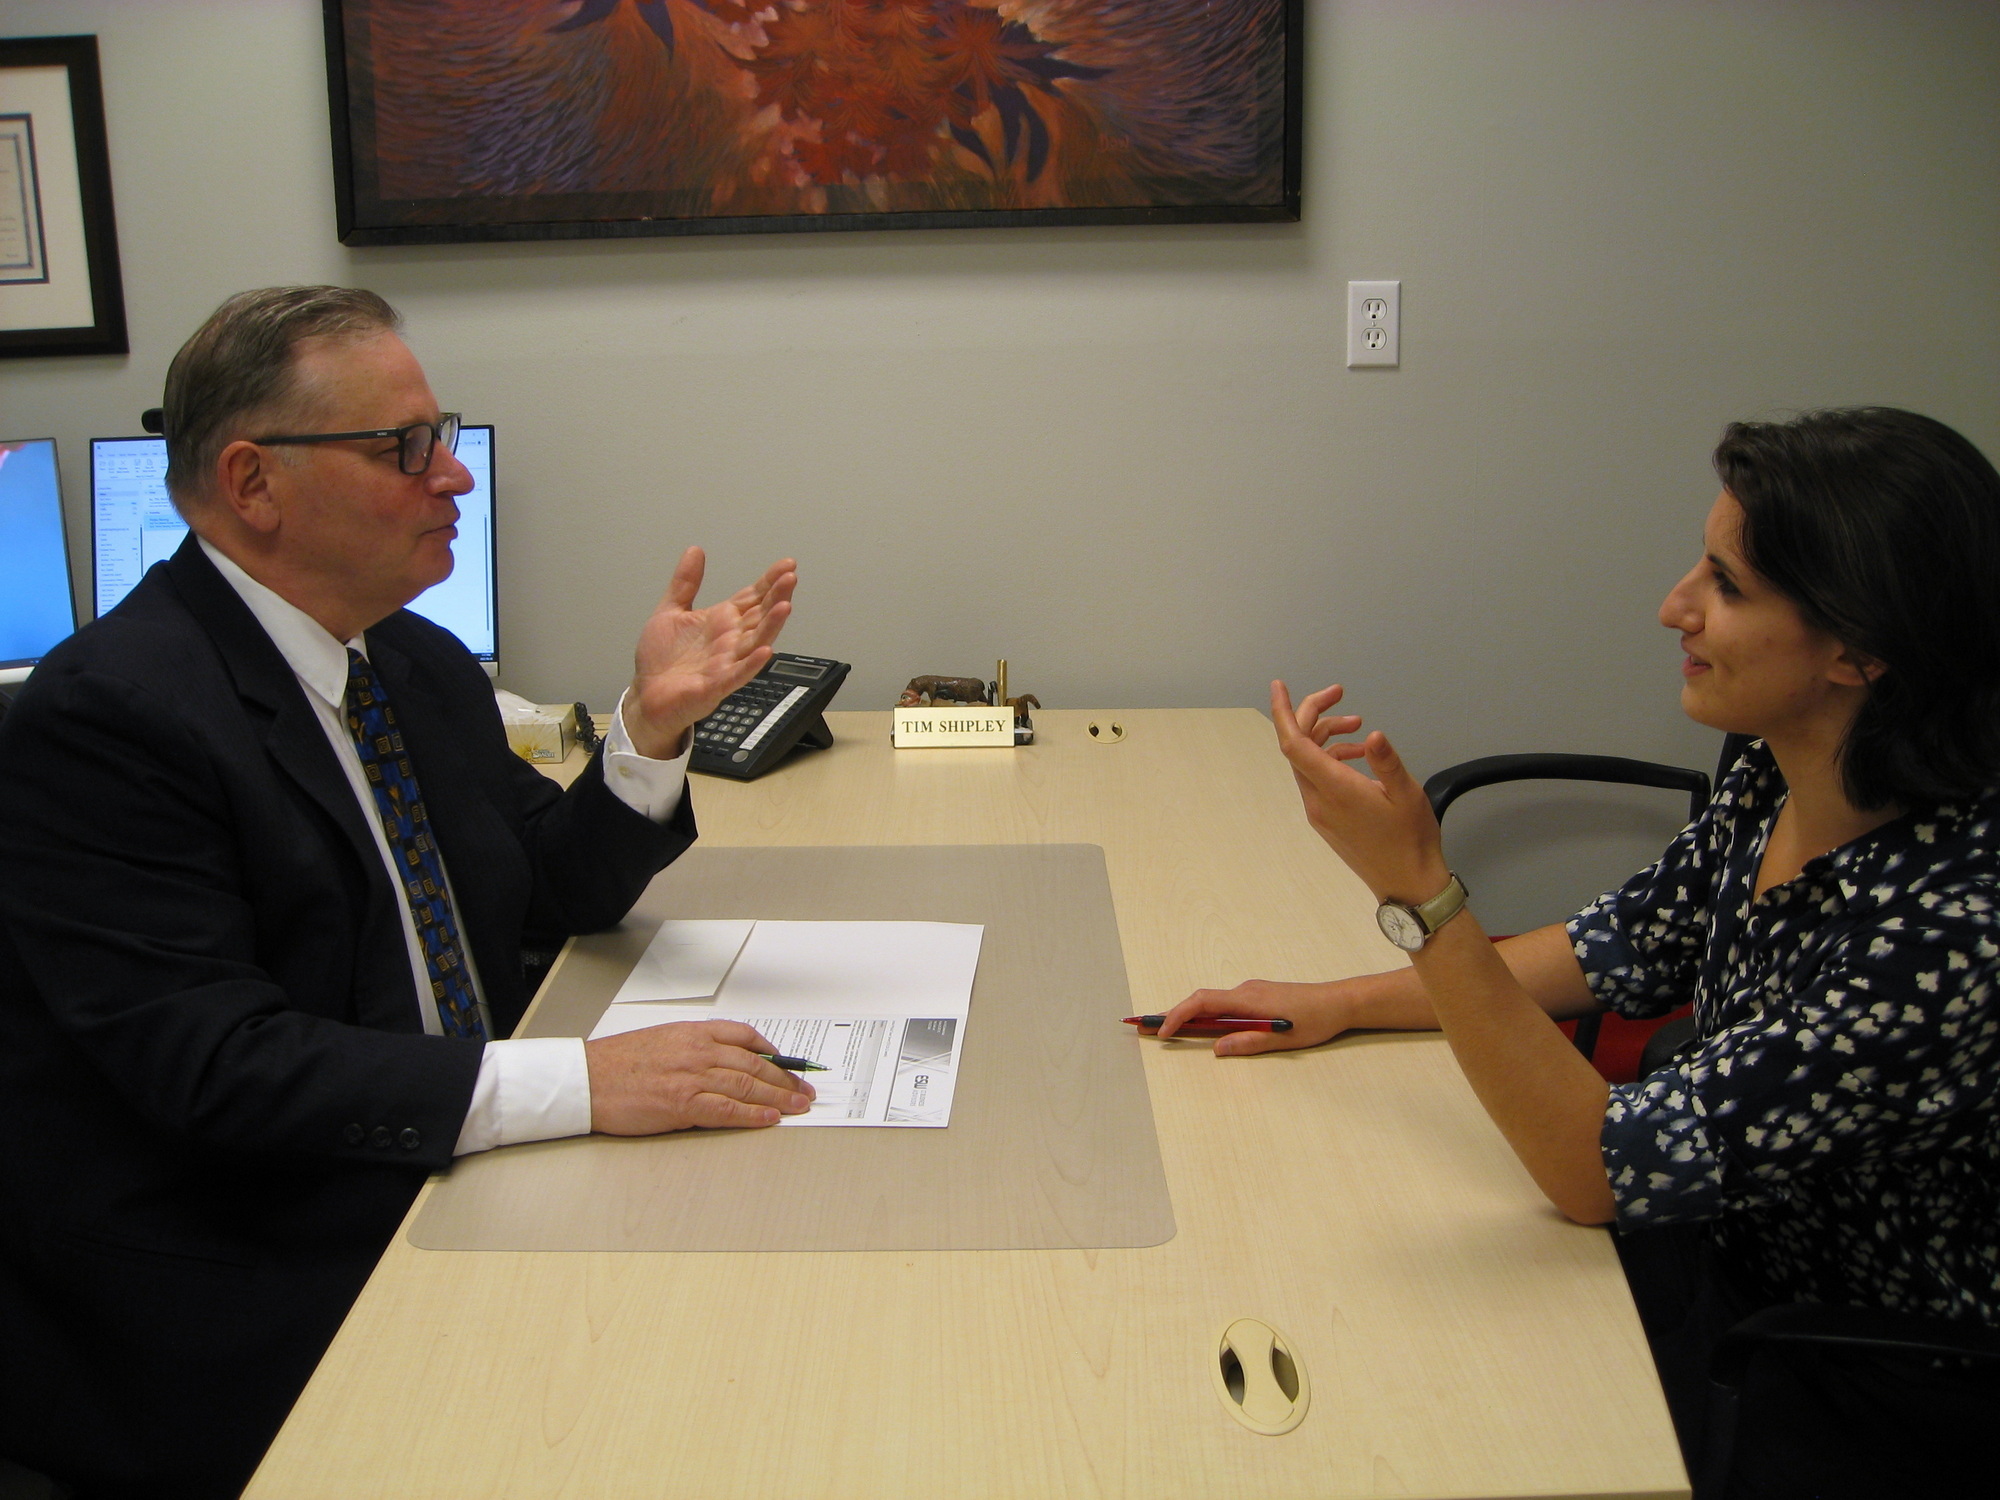 Tim Shipley and a mock customer discussing estate planning and review